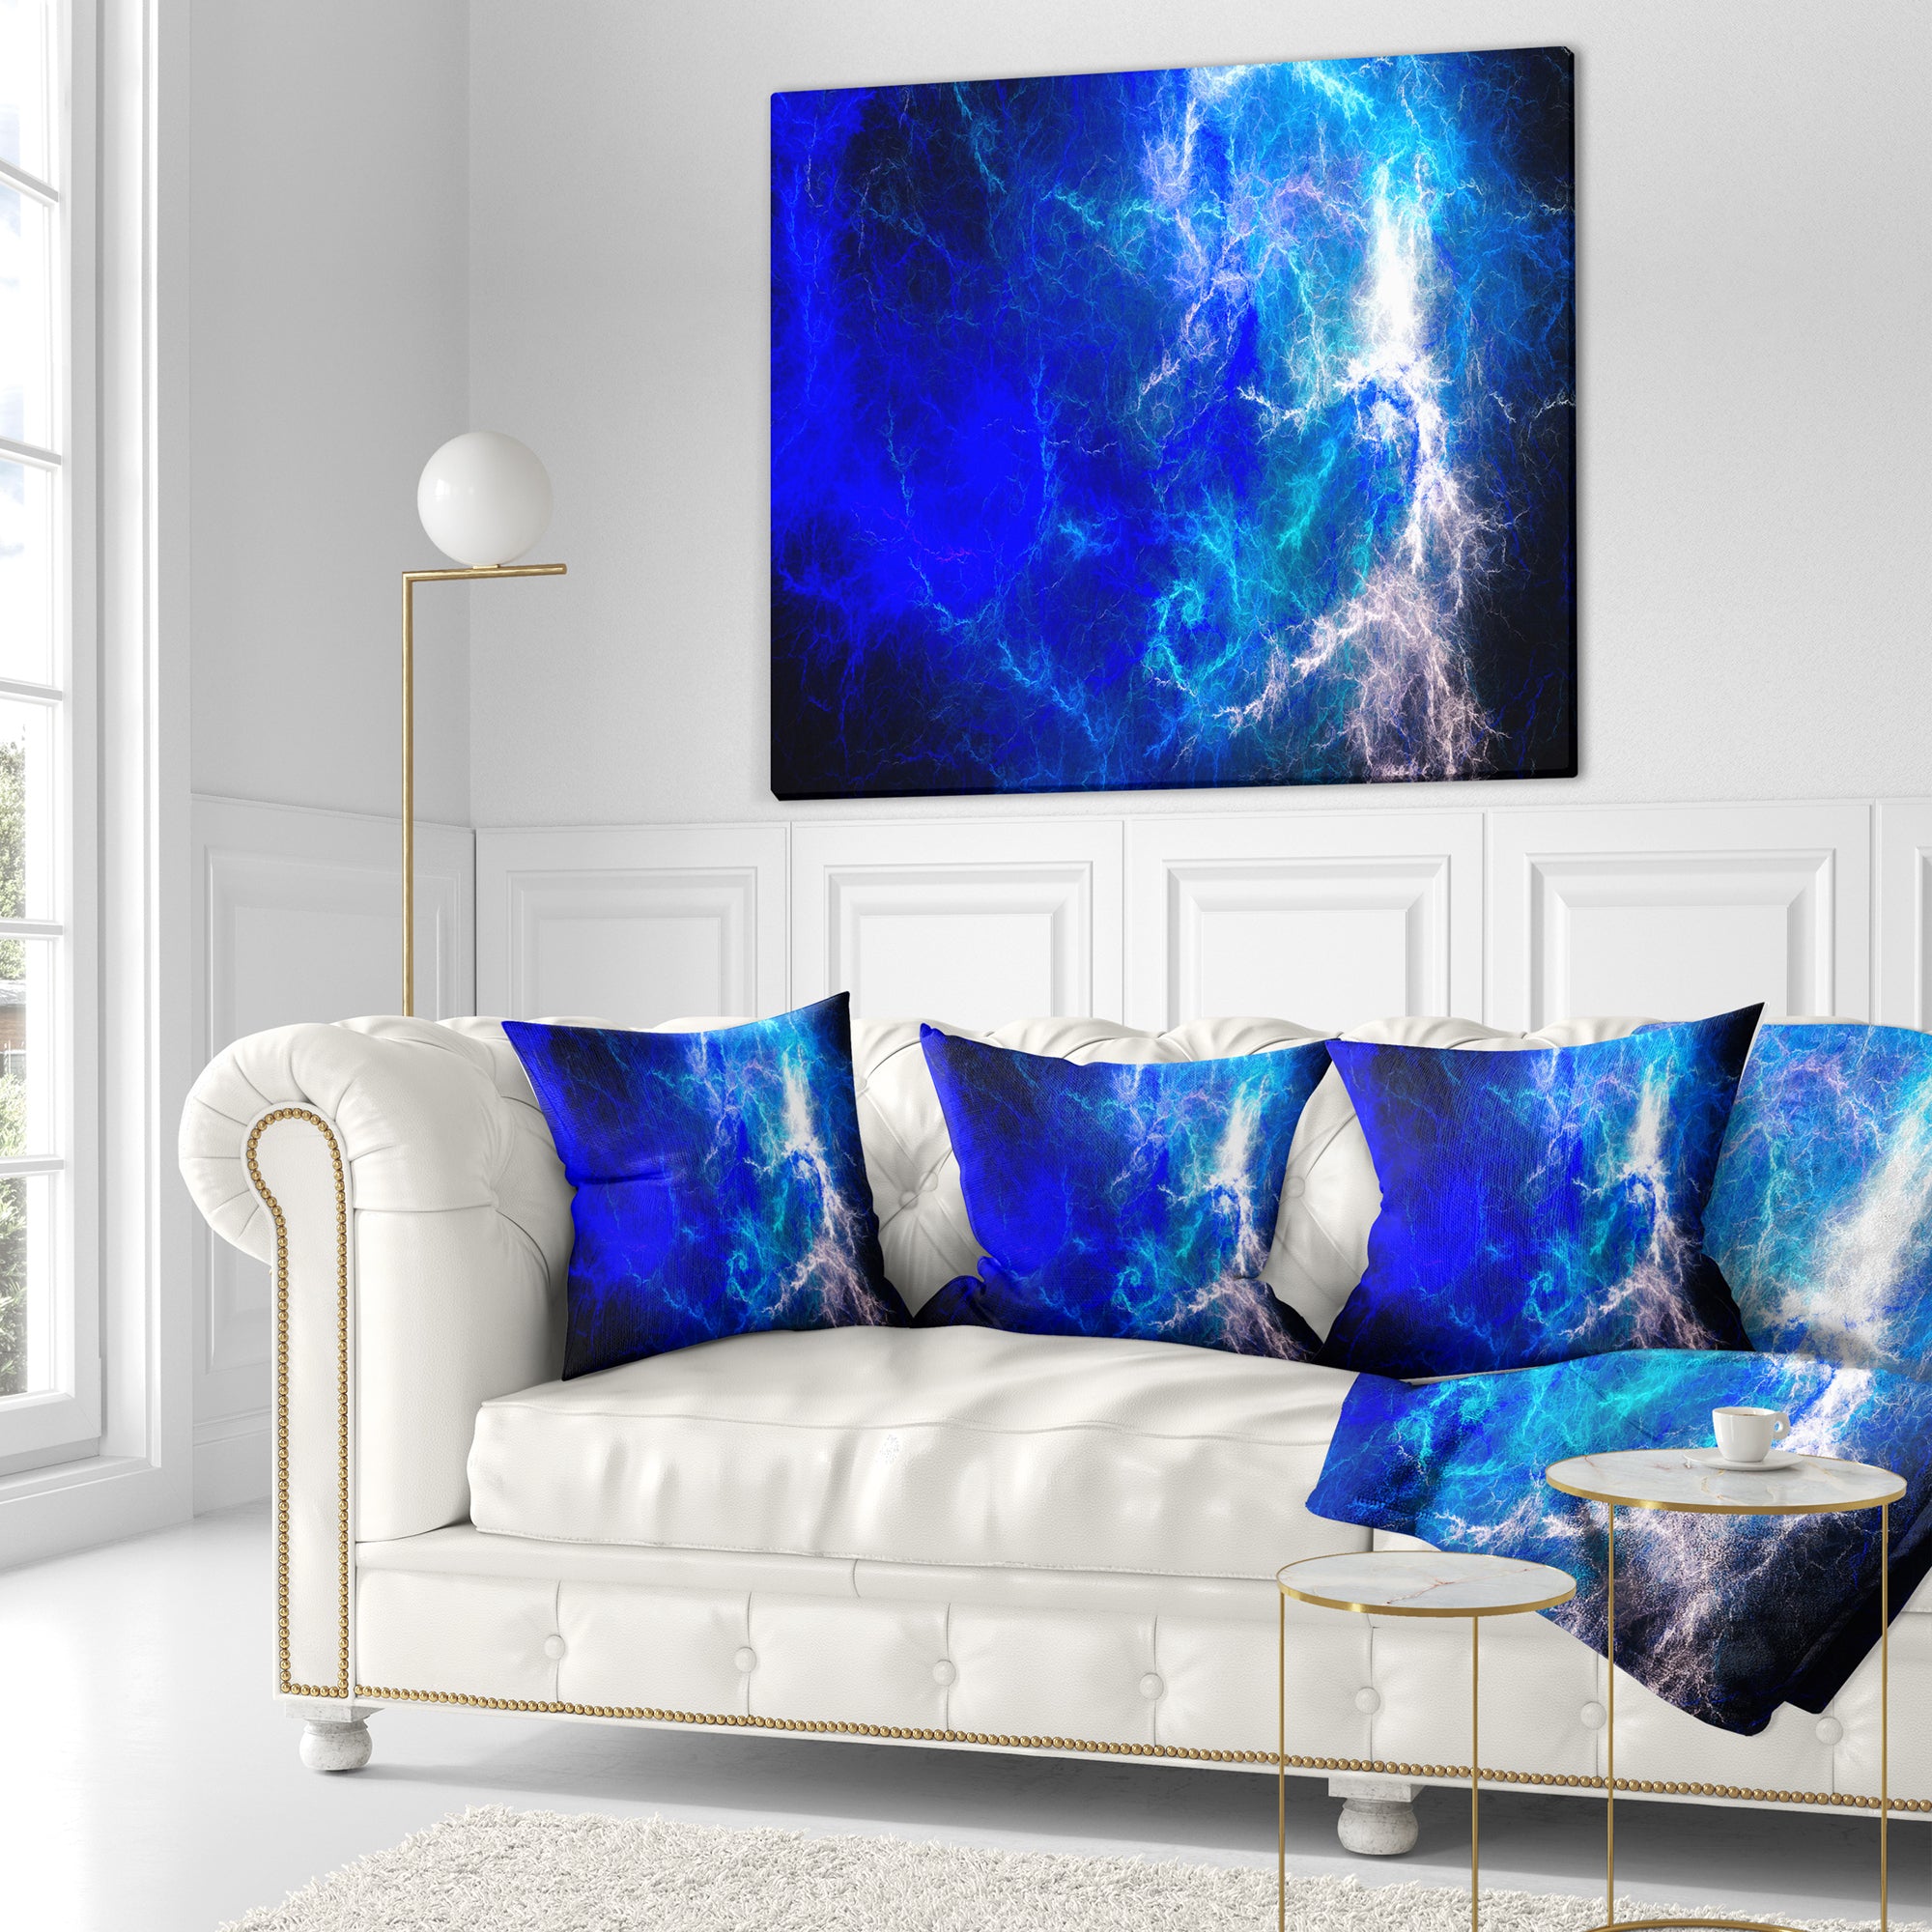 Blue Sparkling Lightning - Abstract Throw Pillow